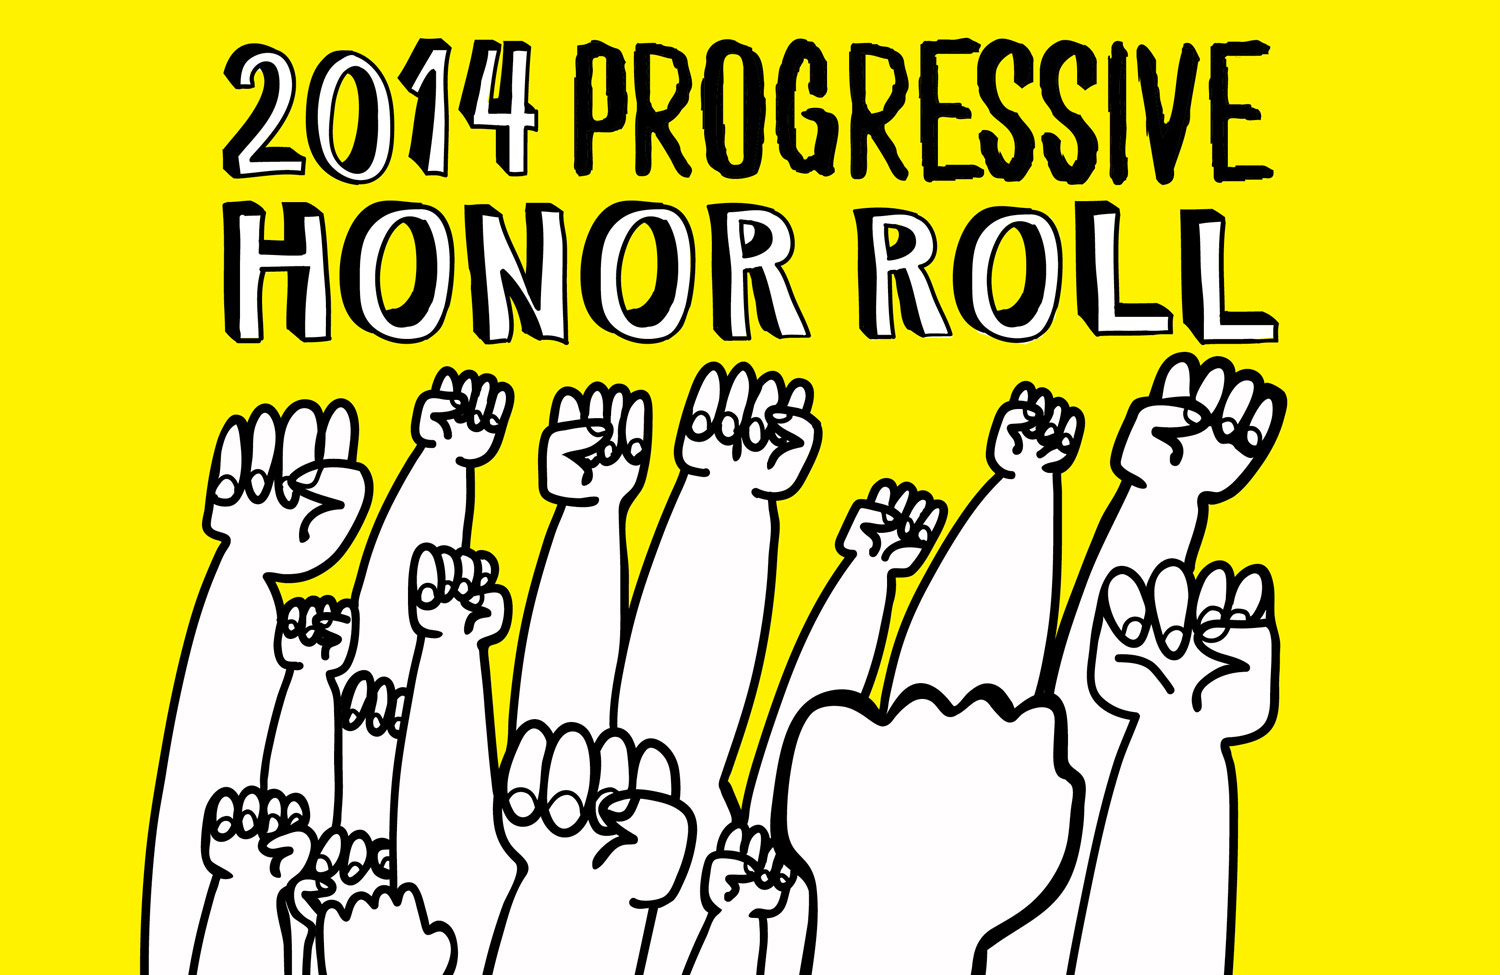 Zephyr Teachout, Hands Up United and John Oliver Made Our 2014 Progressive Honor Roll. Who Else Made the List?